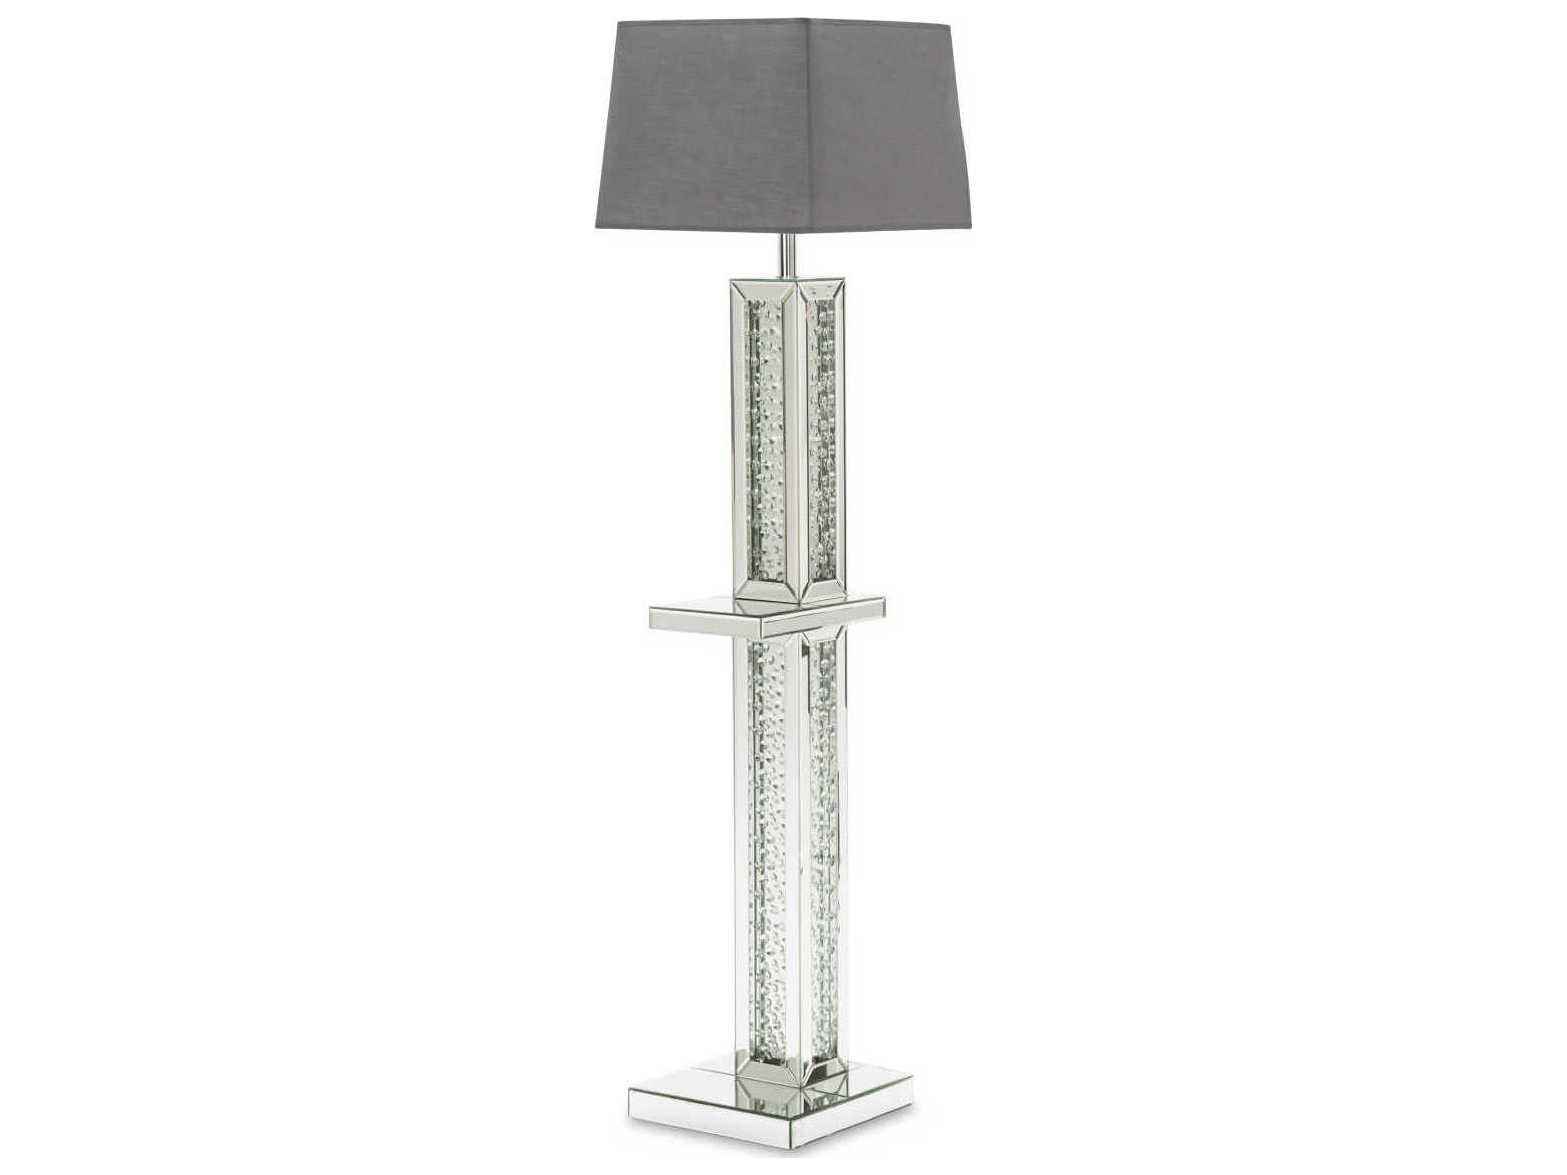 Aico Furniture Montreal Crystal Glass Floor Lamp with regard to size 1567 X 1175